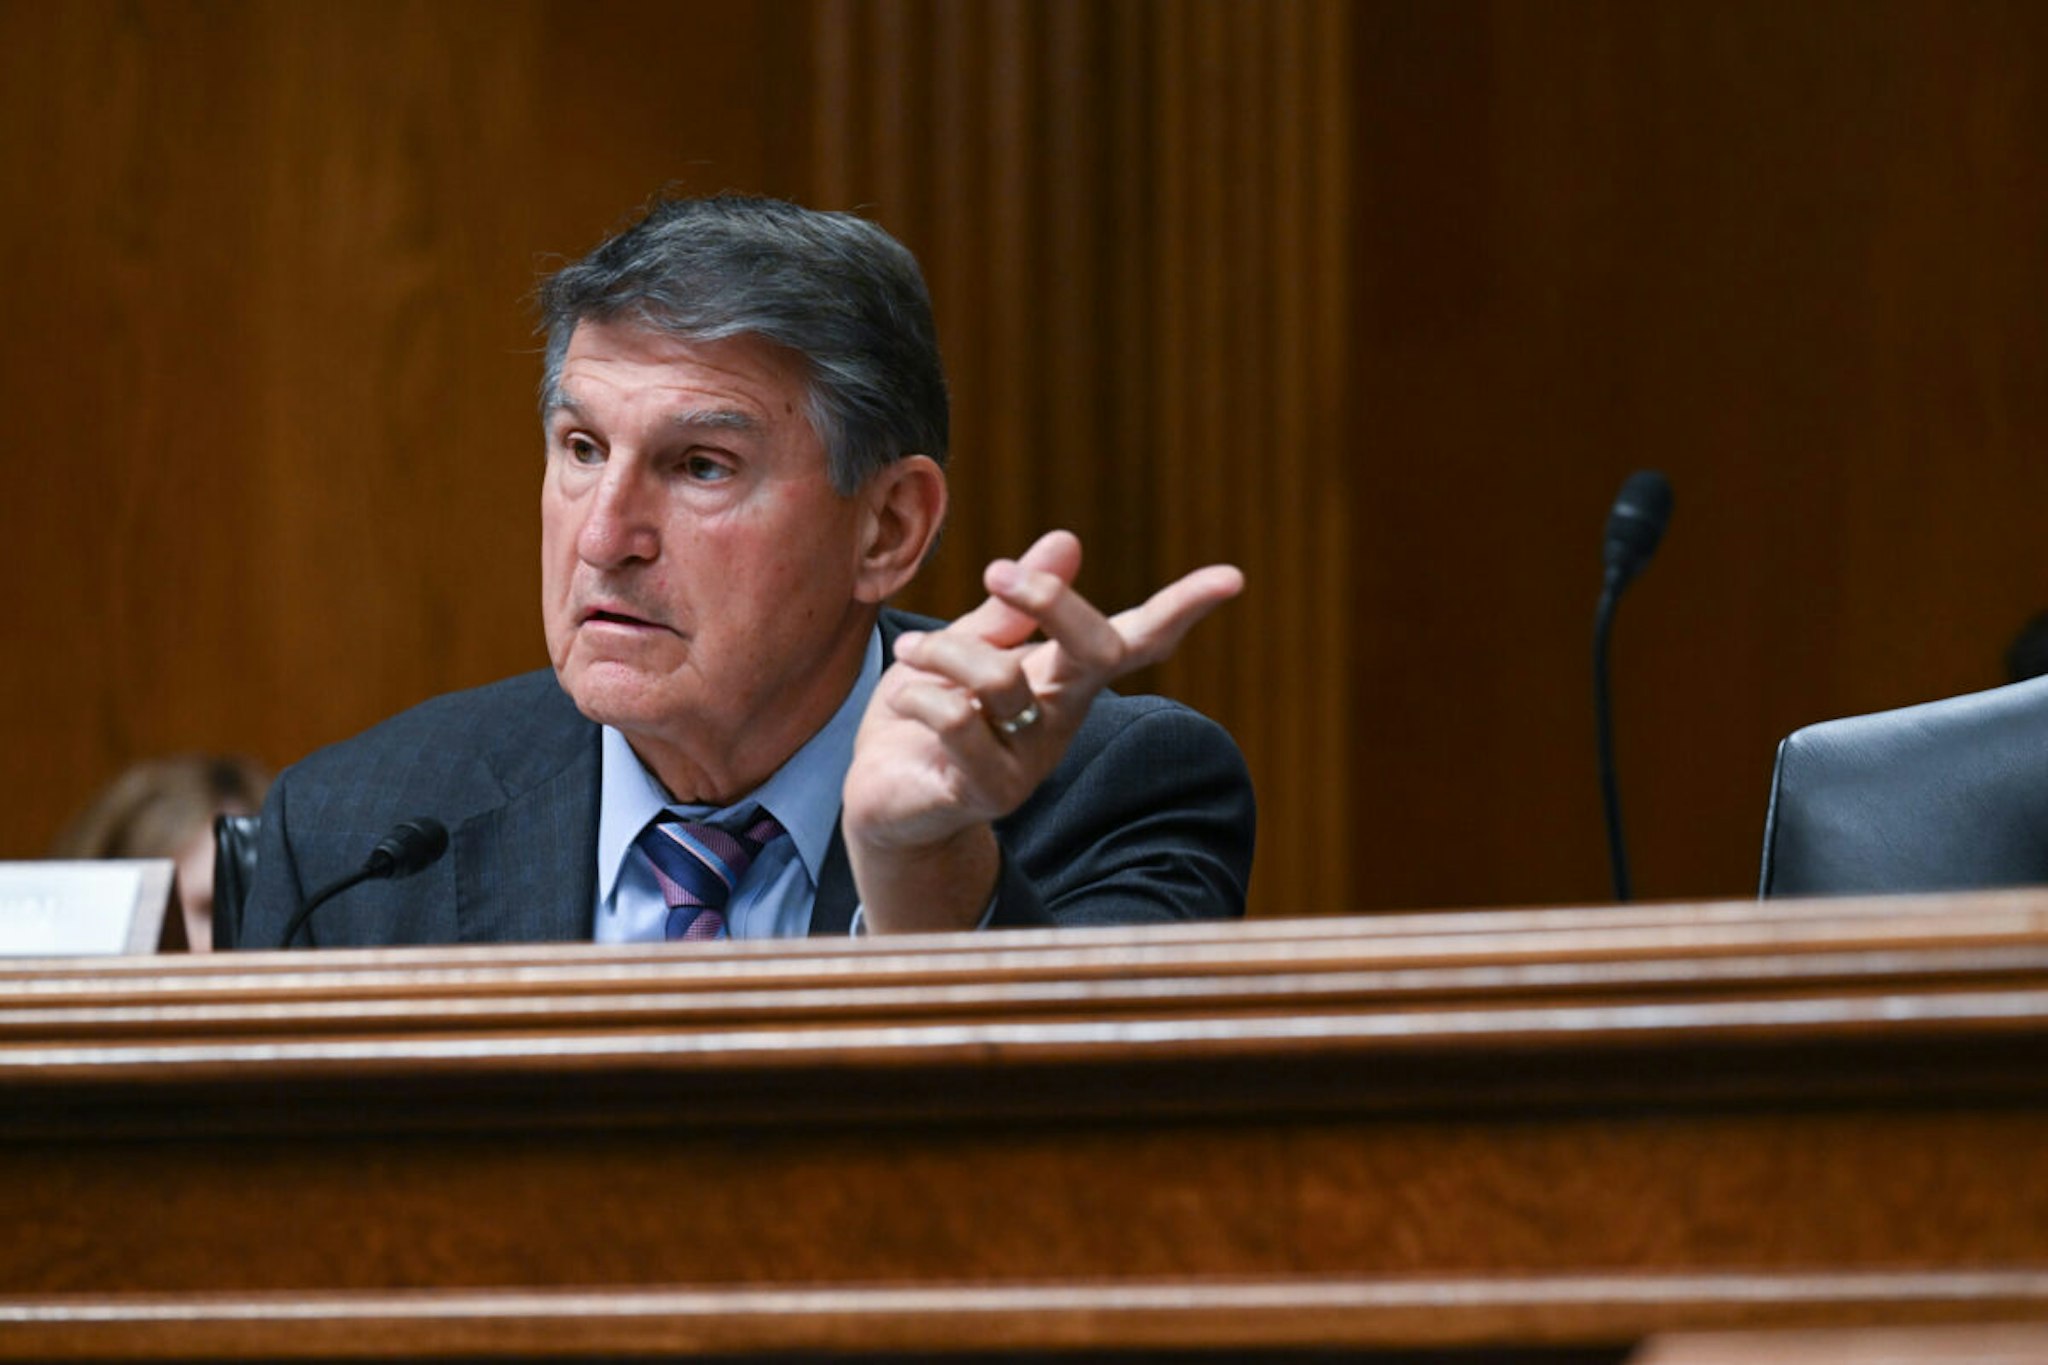 Senator Joe Manchin (D-WV) speaks to Chairwomen of the Federal Communications Commission Jessica Rosenworcel during a Senate Appropriations Subcommittee on Financial Servieces and General Government Hearings at the Dirksen Senate Office Building on Tuesday September 19, 2023 in Washington, DC.